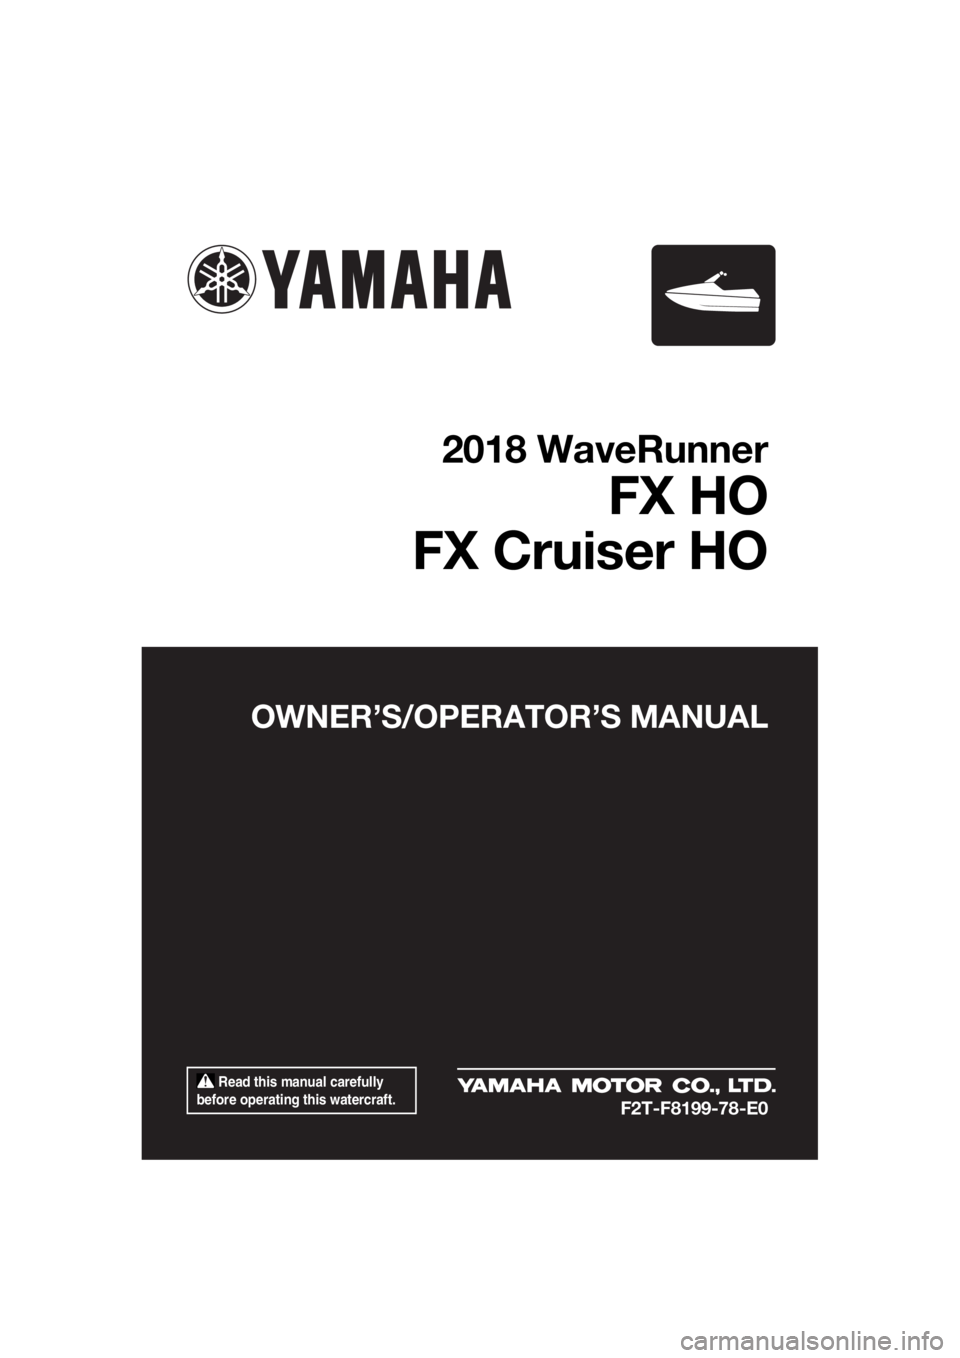 YAMAHA FX HO CRUISER 2018  Owners Manual  Read this manual carefully 
before operating this watercraft.
OWNER’S/OPERATOR’S MANUAL
2018 WaveRunner
FX HO
FX Cruiser HO
F2T-F8199-78-E0
UF2T78E0.book  Page 1  Wednesday, July 12, 2017  9:40 A